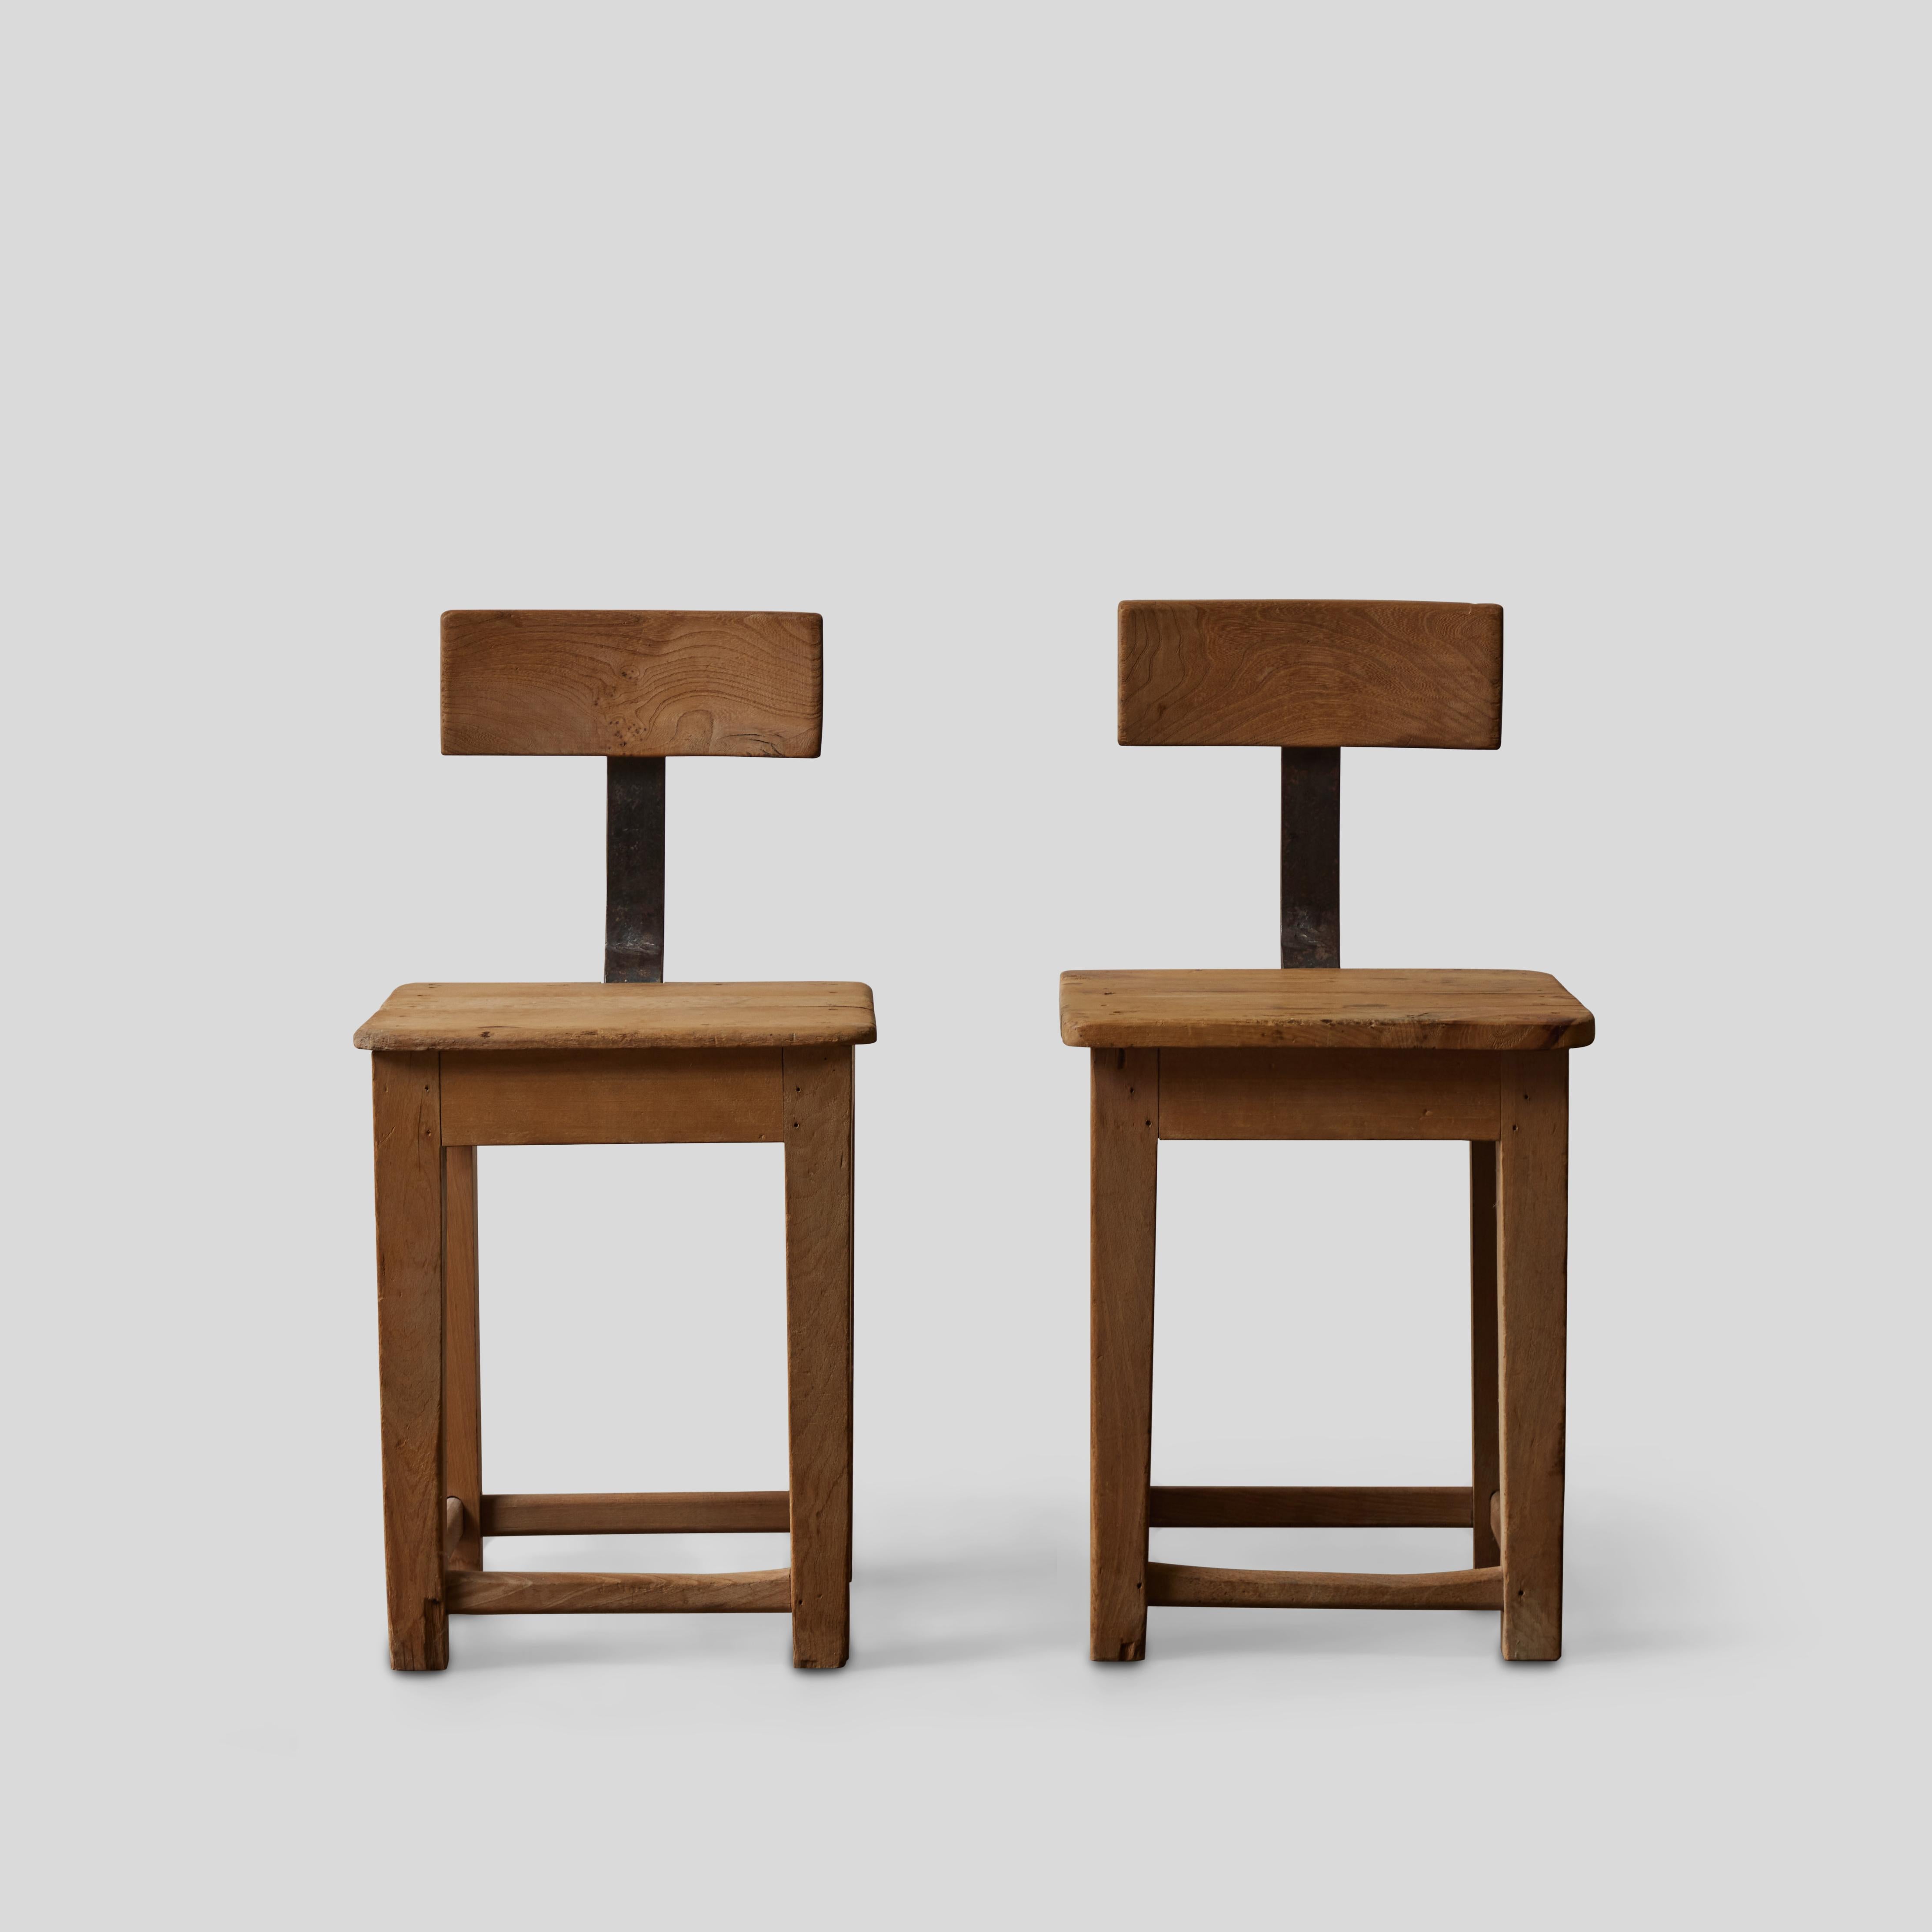 Pair of early 20th-century French Primitivist wood dining or side chairs with industrial metal accents. The wood has a raw finish, which complements the chairs' stark geometric design. Time and wear has developed a unique rustic patina and finish